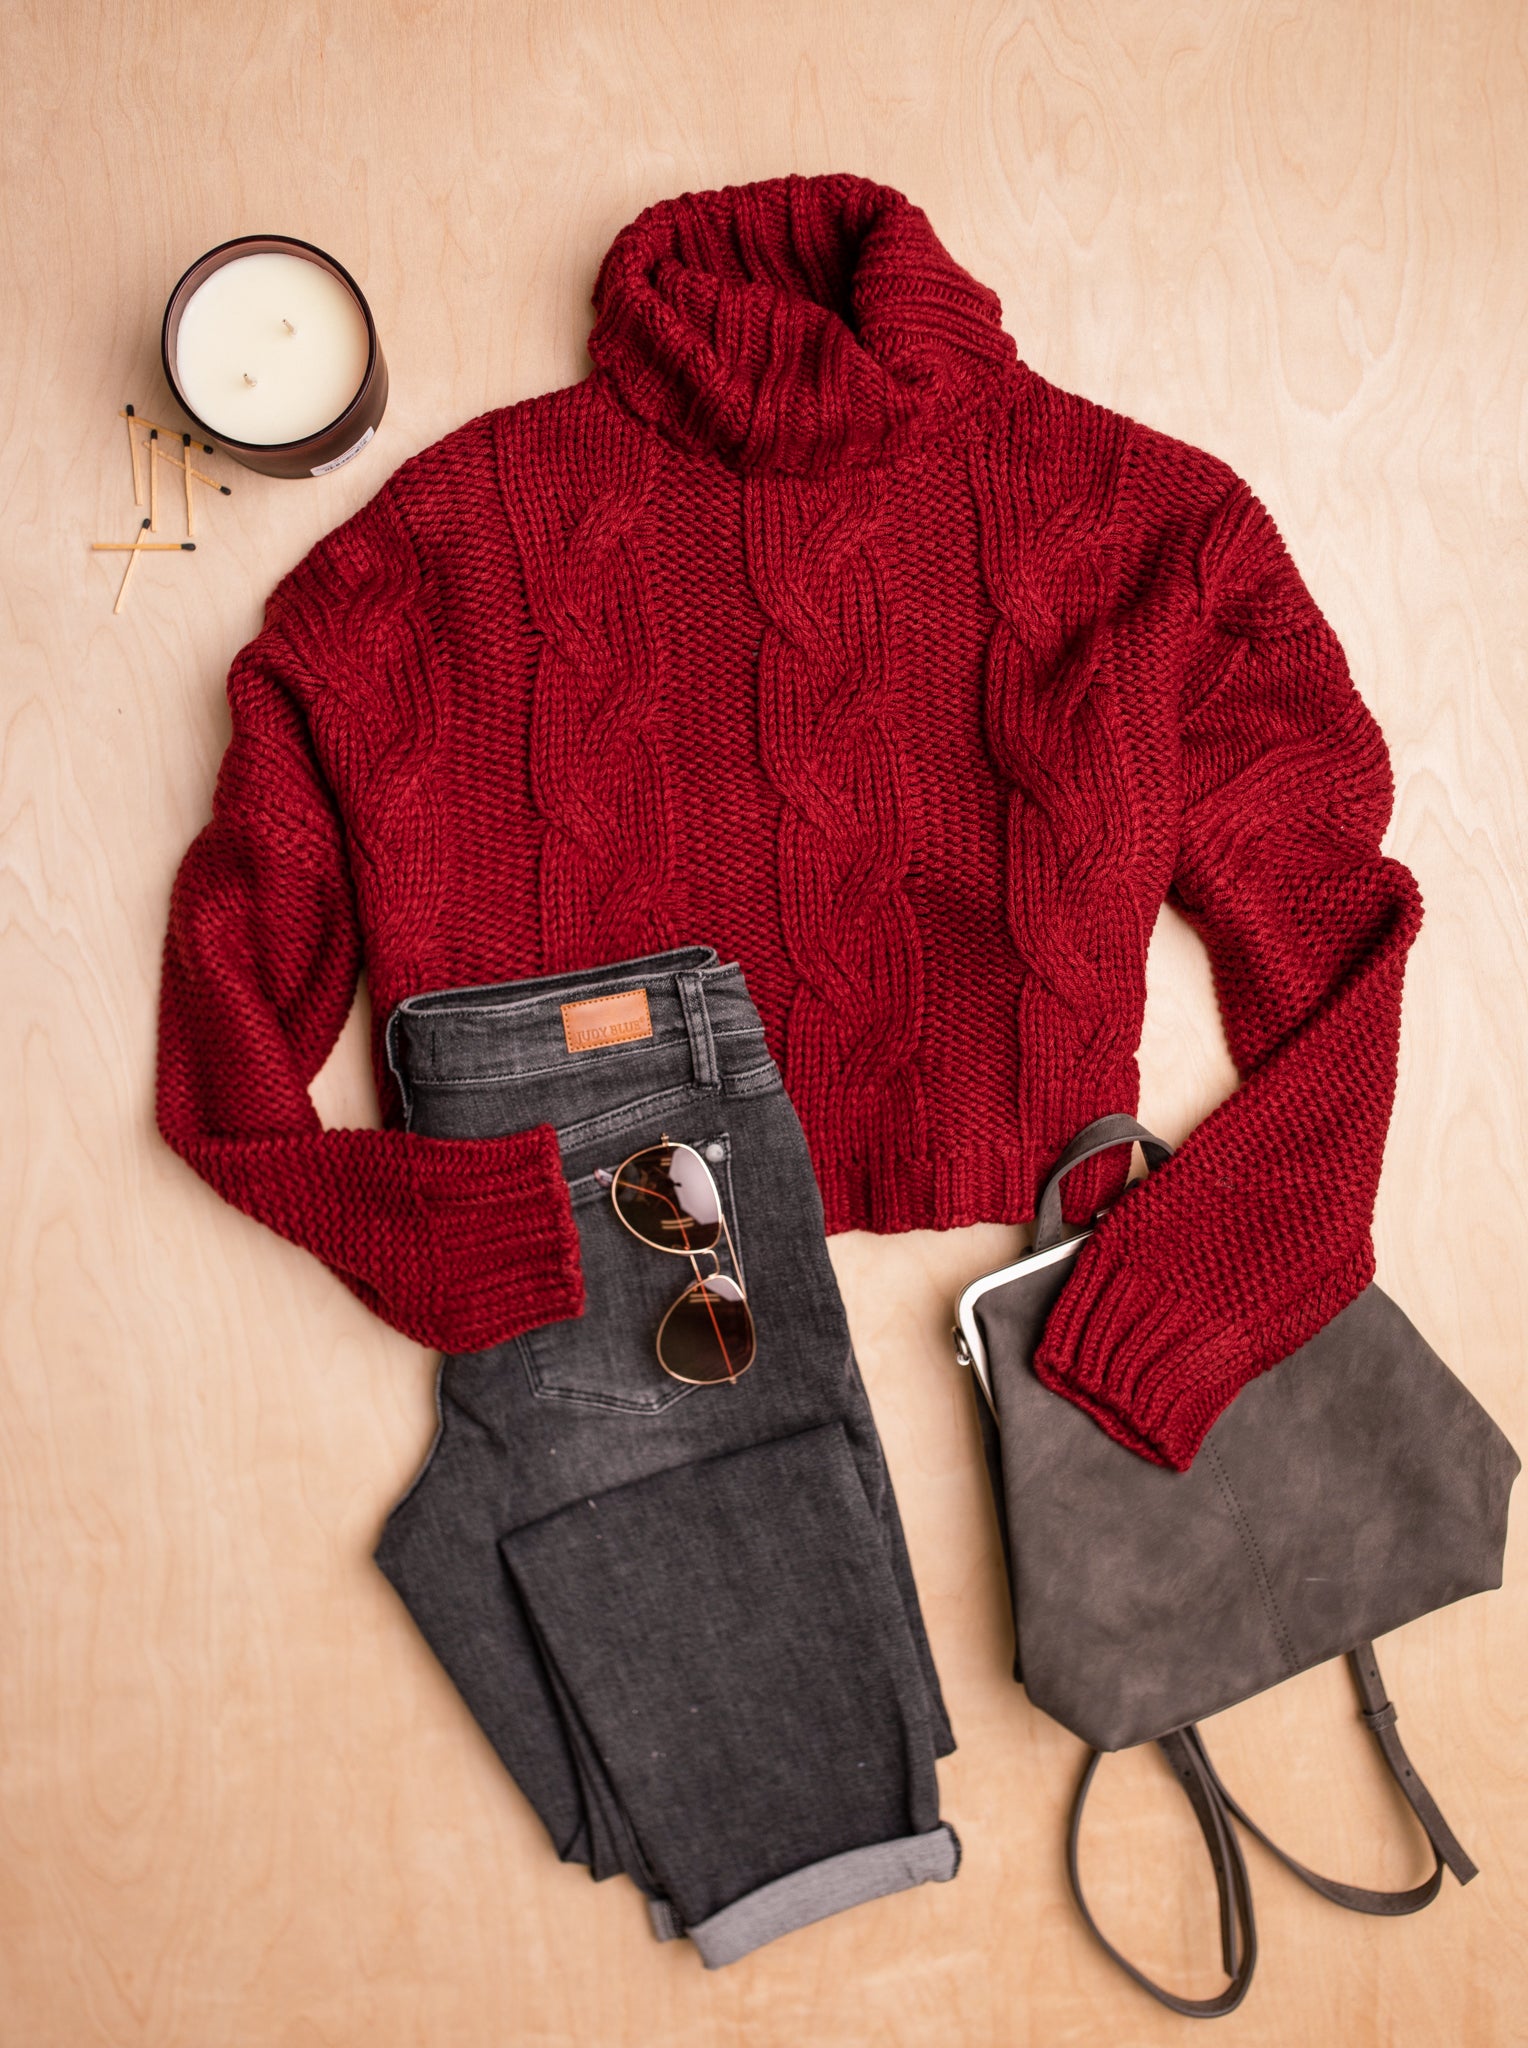 Casual :: Distressed Denim + Comfy Sweater - Color & Chic